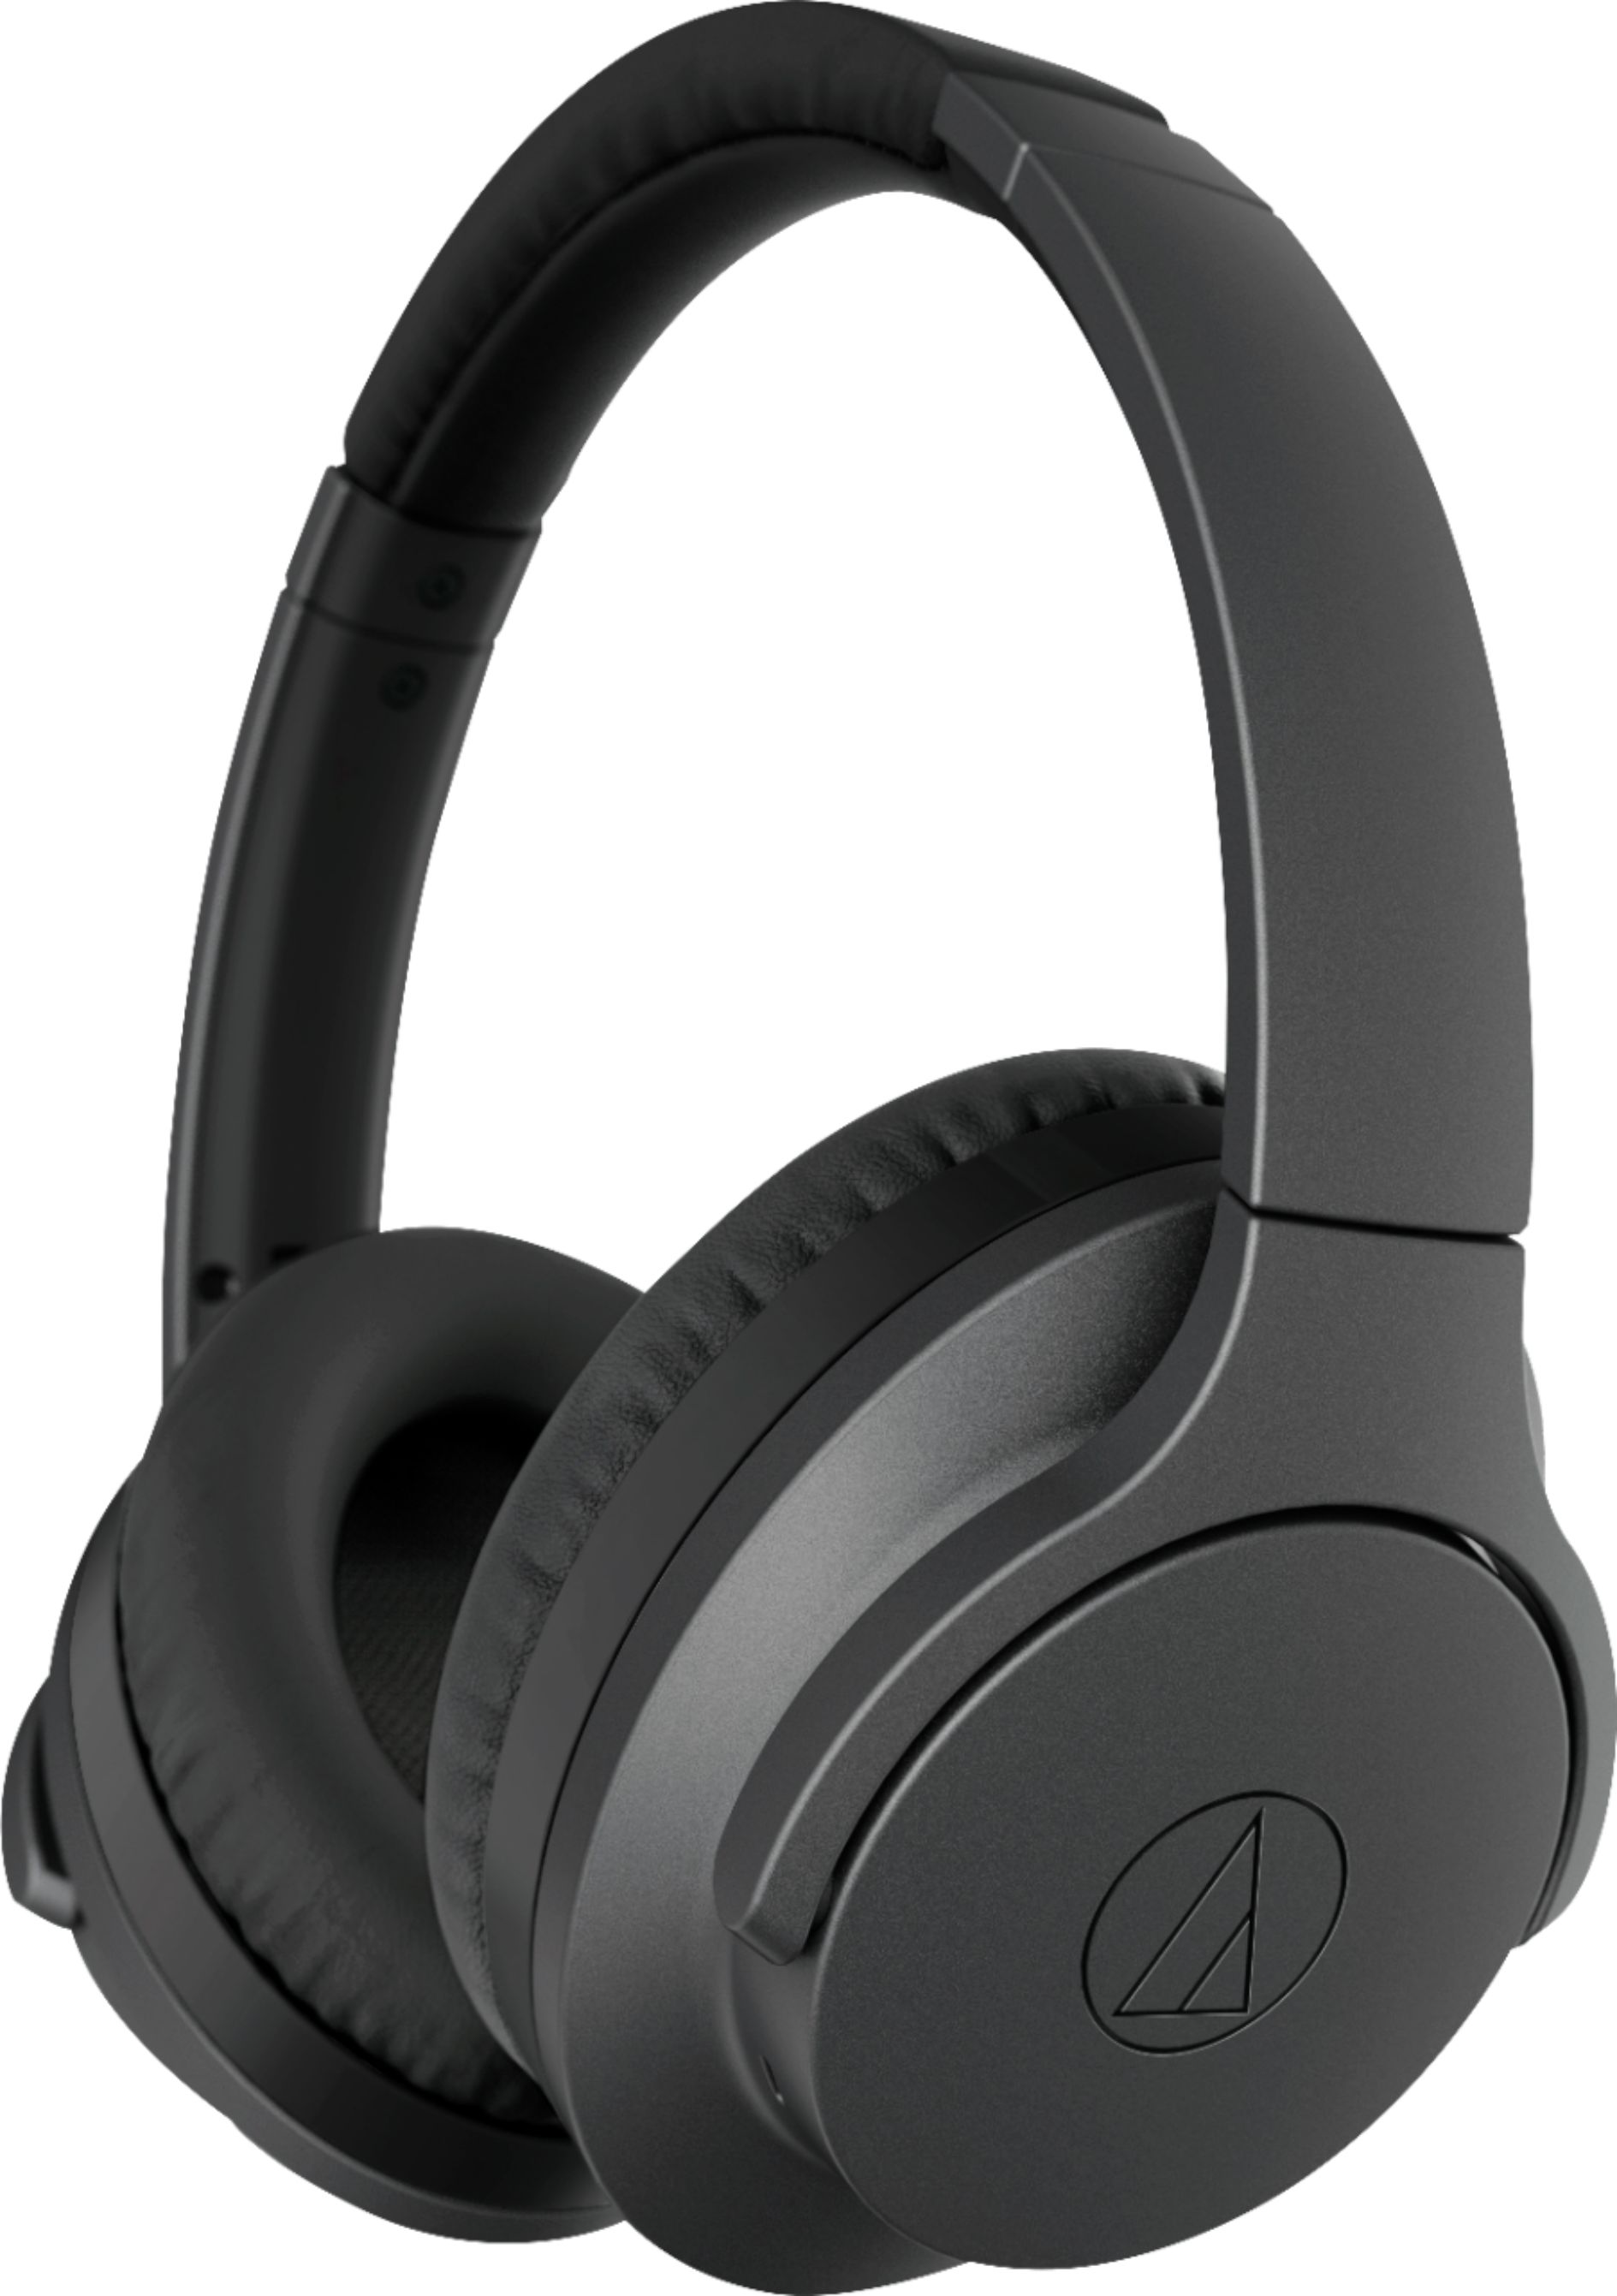 Angle View: Bang & Olufsen - Beoplay HX Wireless Noise Cancelling Over-the-Ear Headphones - Black Anthracite